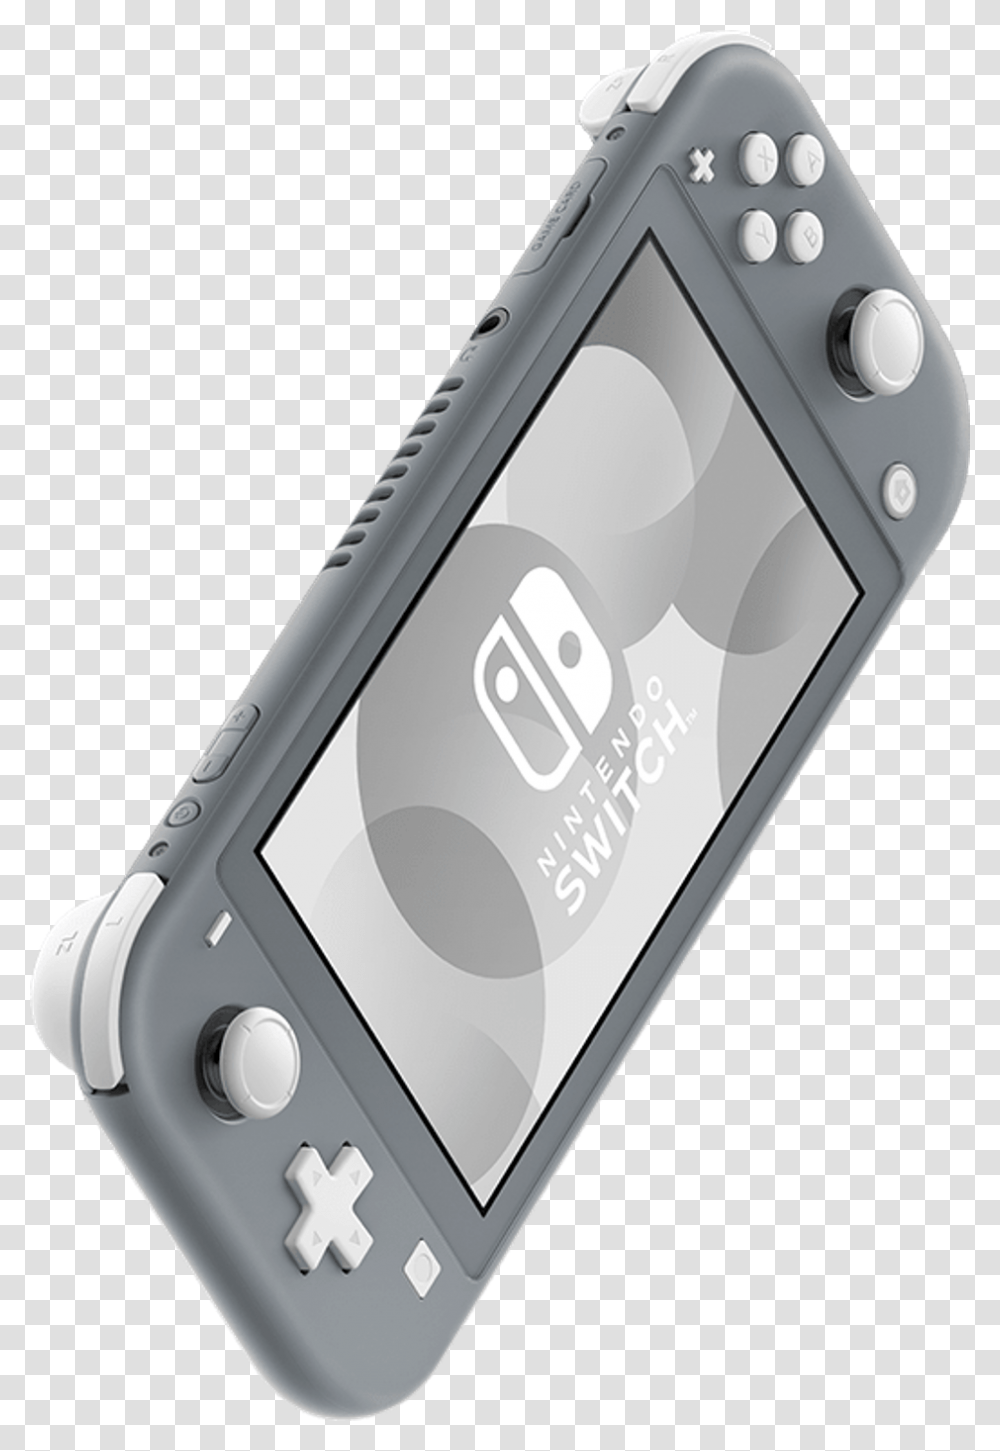 Nintendo Switch Lite Grey, Phone, Electronics, Mobile Phone, Cell Phone Transparent Png